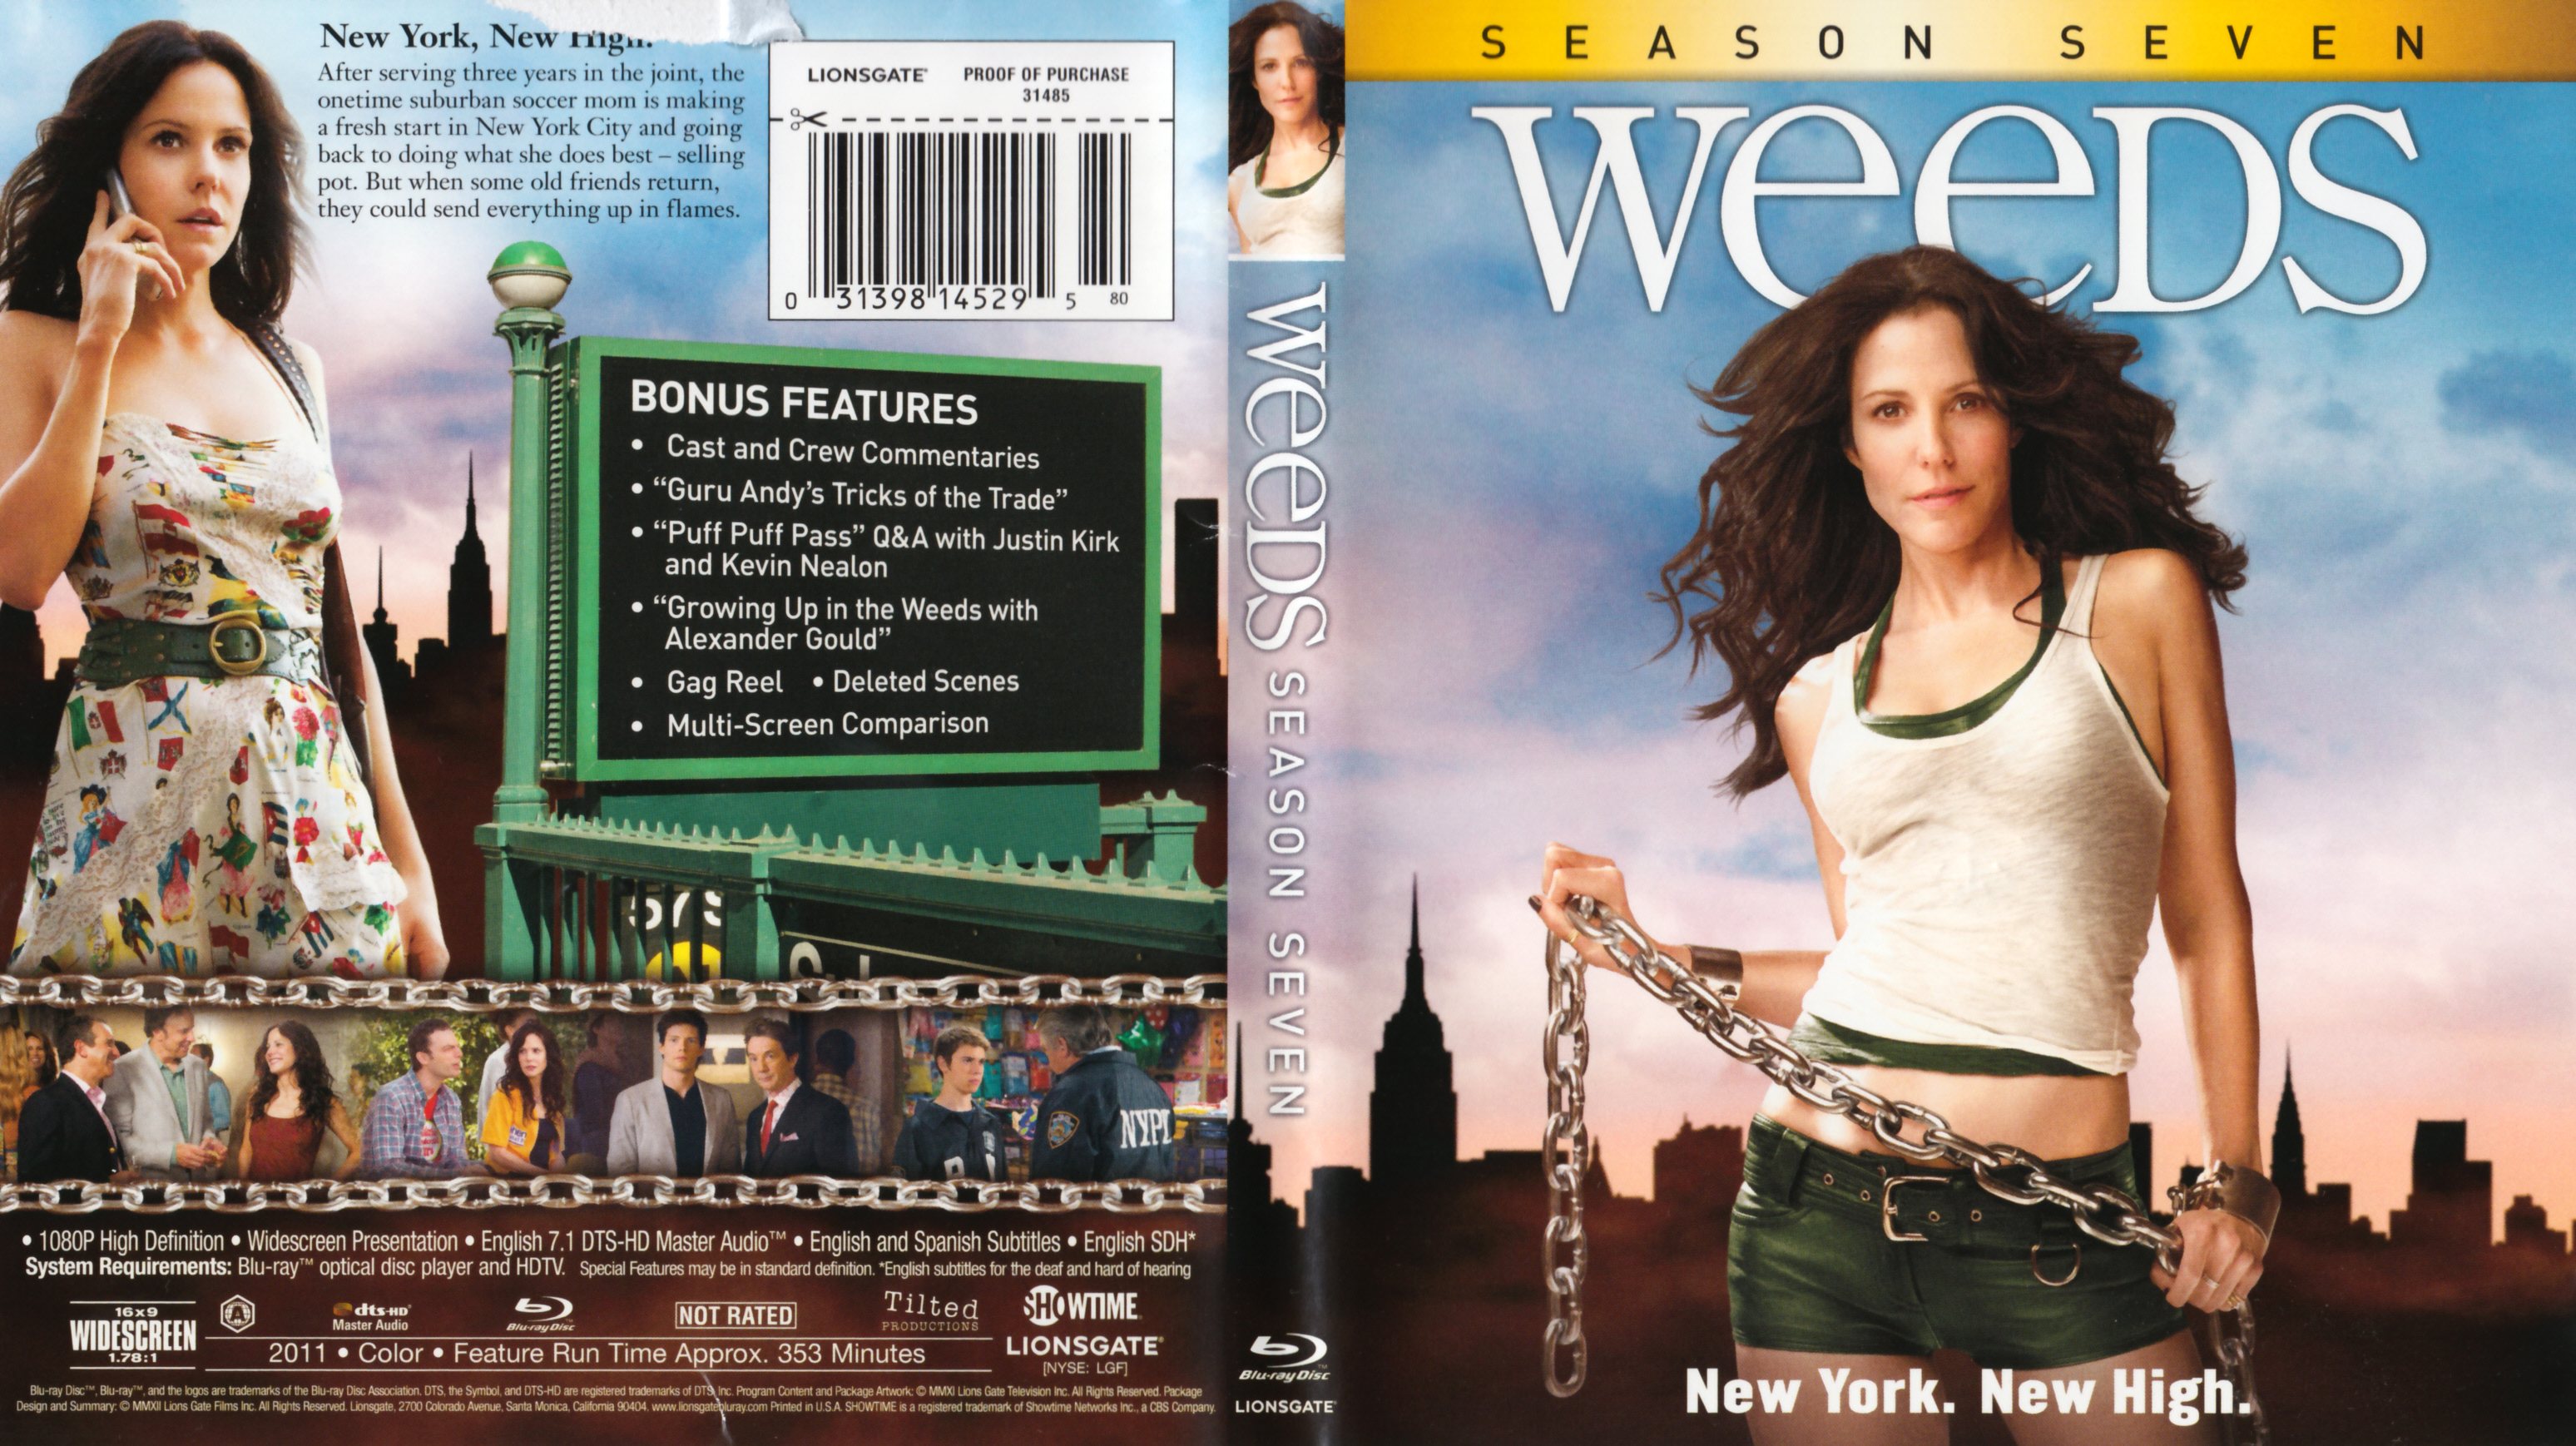 Jaquette DVD Weeds Saison 7 Zone 1 (BLU-RAY)